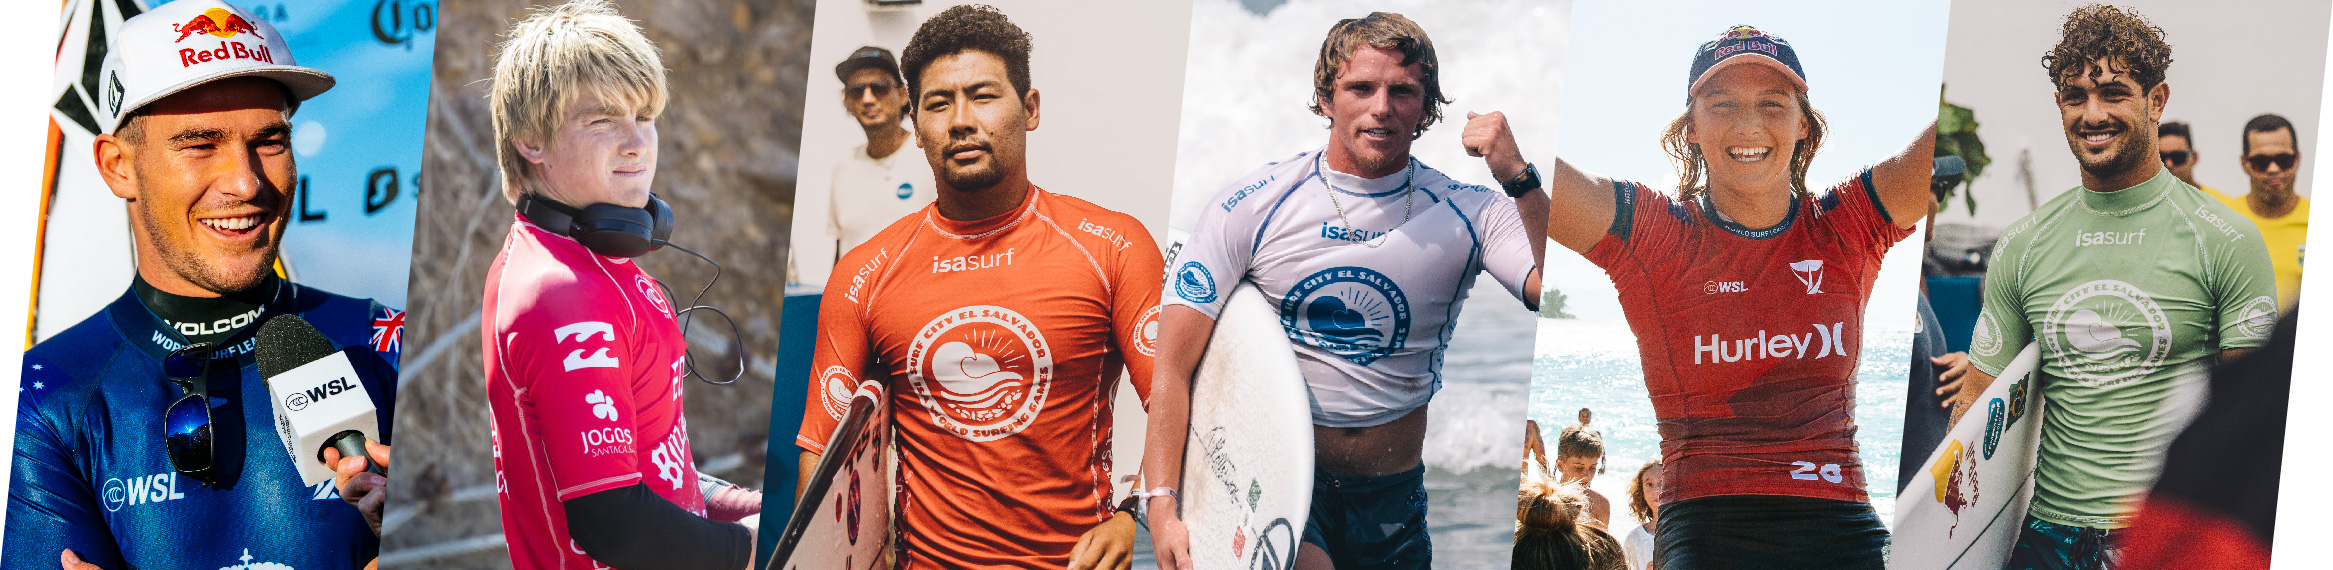 Six Additional Surfers Confirmed for Paris 2024 Olympic Games